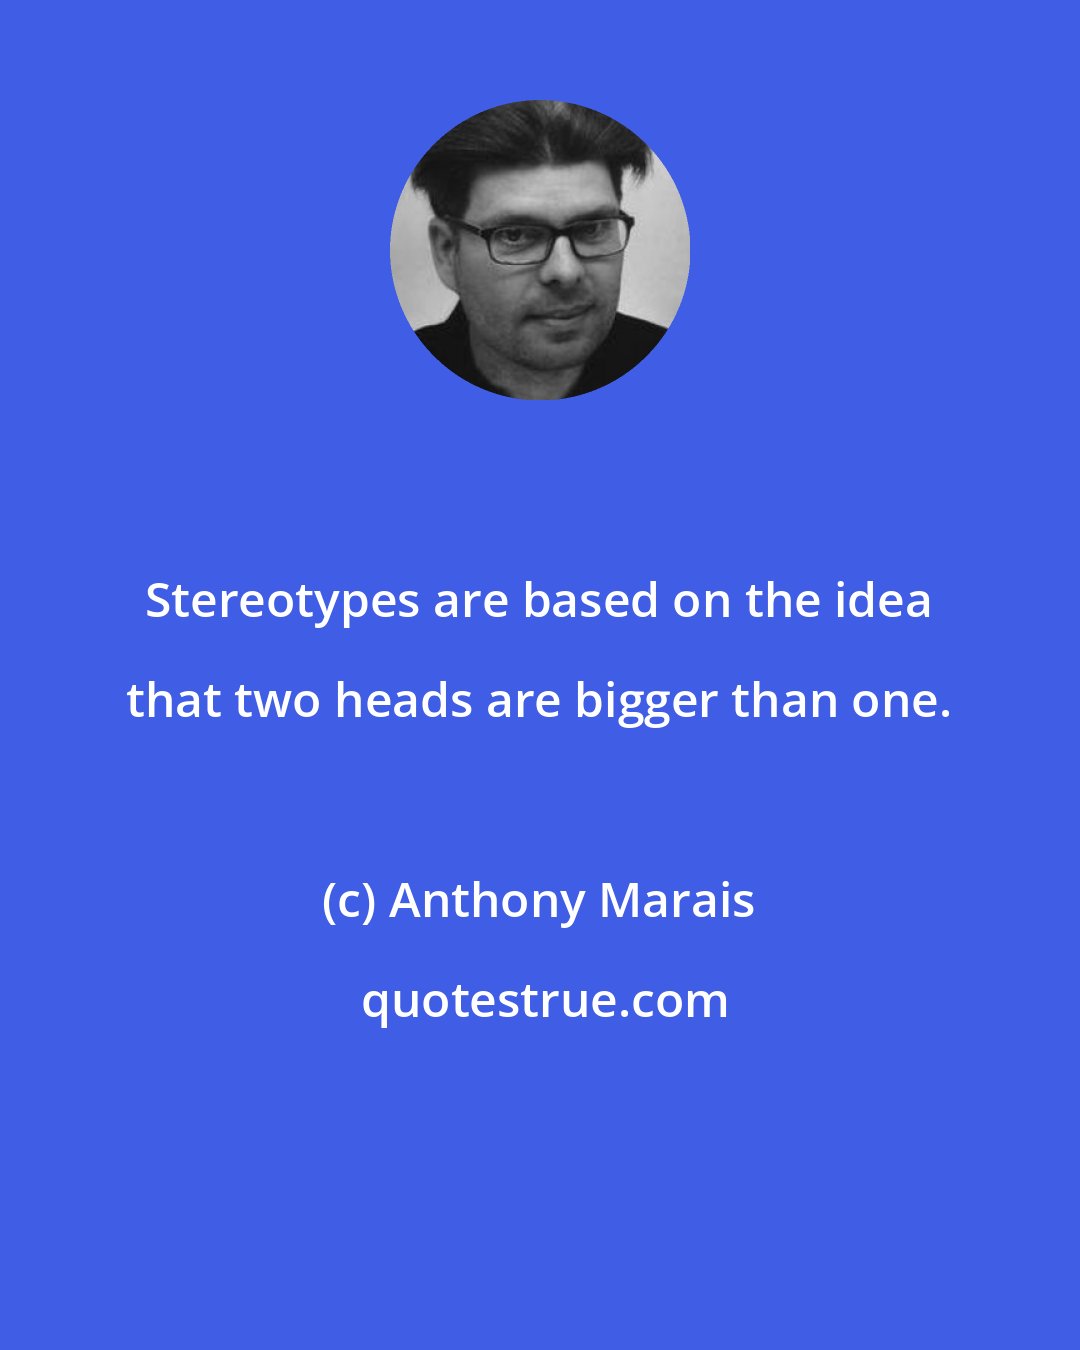 Anthony Marais: Stereotypes are based on the idea that two heads are bigger than one.